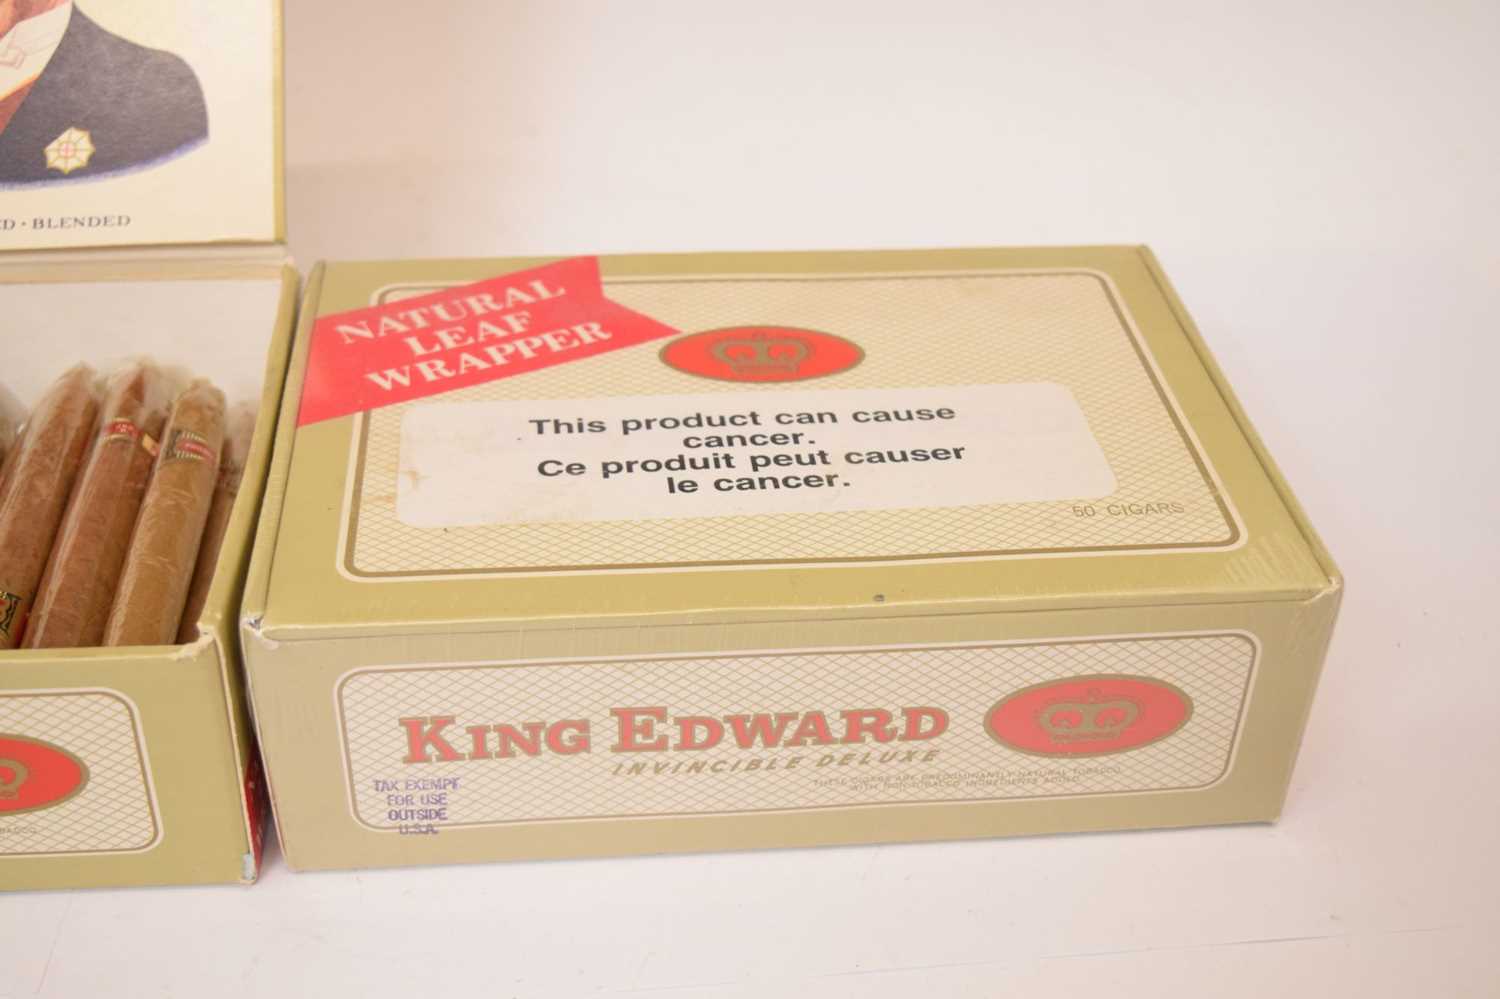 King Edward Invincible DeLuxe Cigars - Image 5 of 5